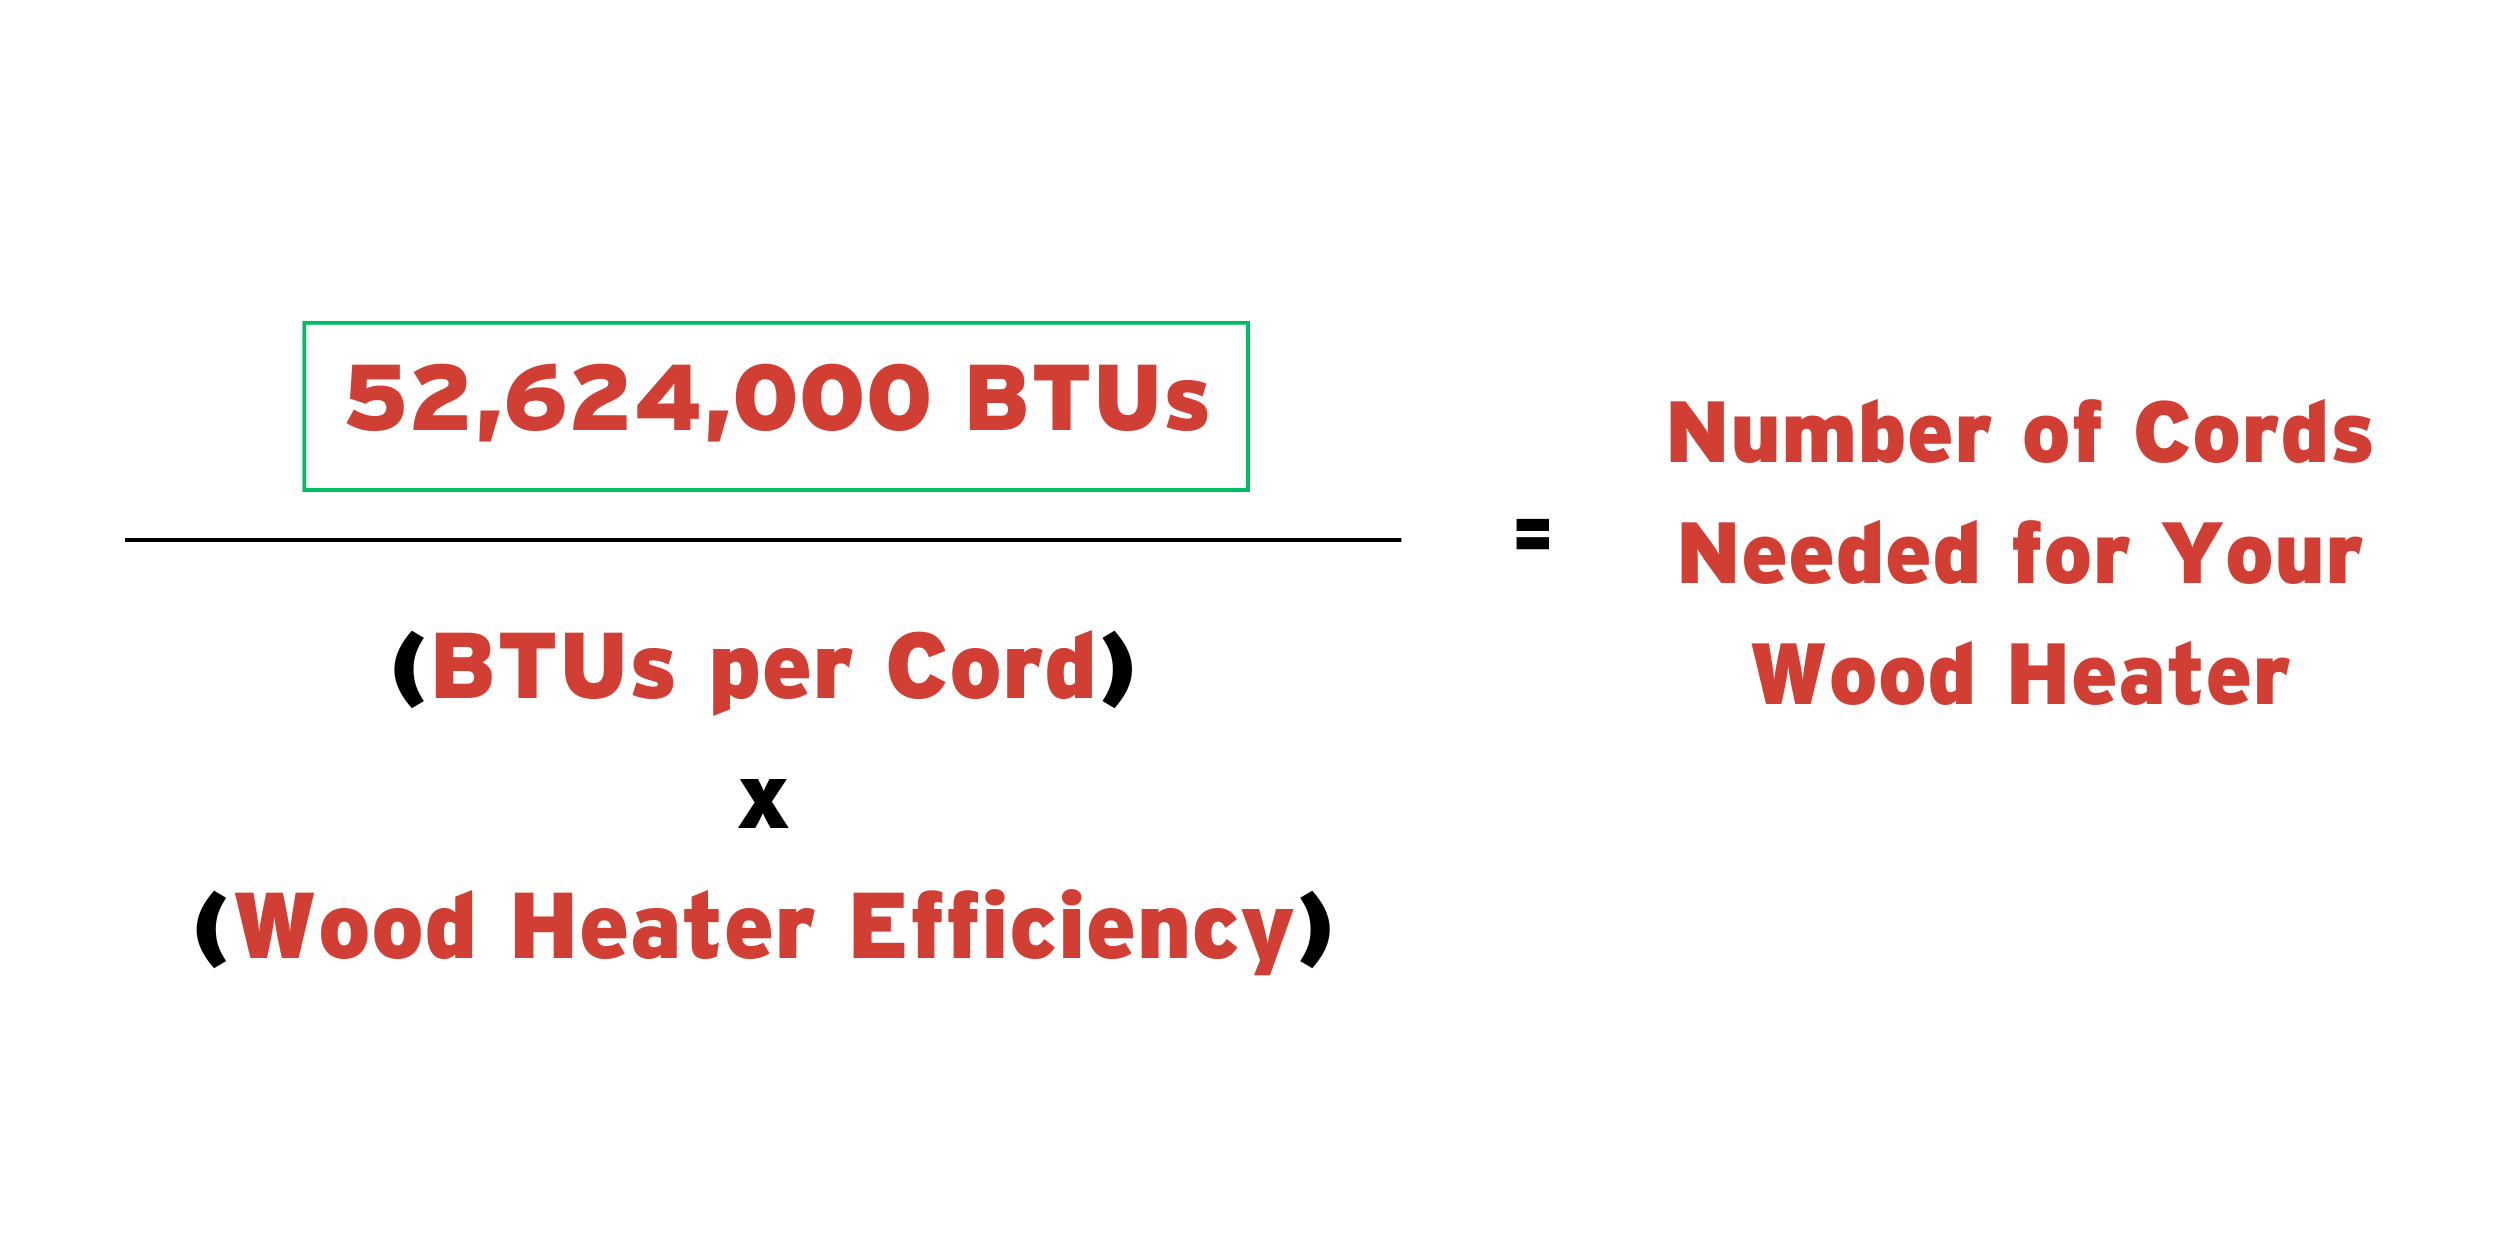 The formula for calculating the total number of cords to use in a wood heating device with 52,624,000 BTUs plugged into the numerator.